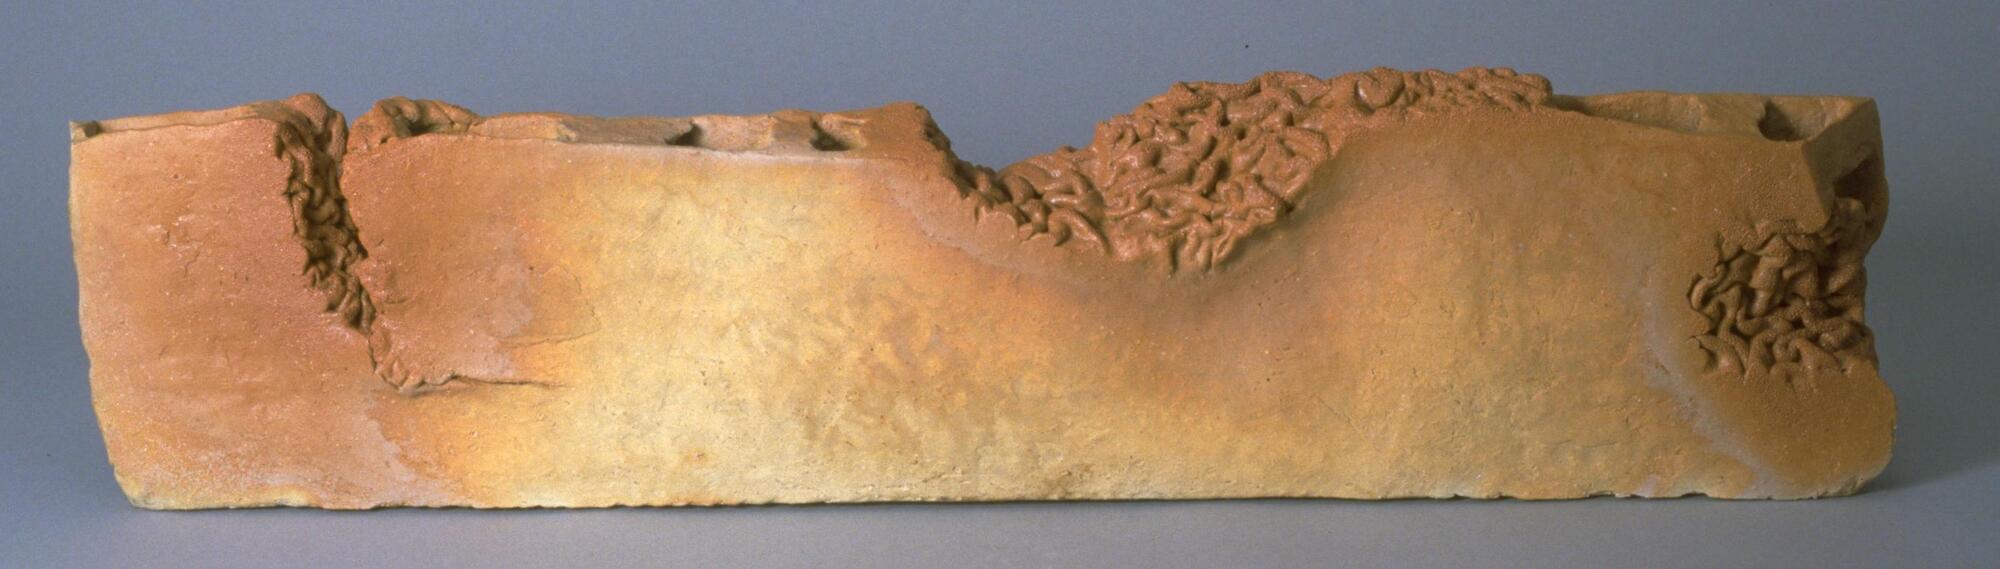 It is a long, rectangular unglazed ceramic piece, intended to be shown in horizontal position. Two thick slabs are connected with bridges inside. The front part has almost flat surface; there is a deep cut on the left side, in which mass of worm-like inner surface can be seen. The same surface is revealed in the middle, as well as on the right edge. The top of the slab has a several shallow holes and one deep cut, inside of which has worm-like surface, as explained above. There is also a dent on the top and on the right, from which worm-like mass seems to be coming out. Reddish shadows cast on left side, in the middle, and the right. There is a patch of clay on left side near the left cut. The bottom is flat.